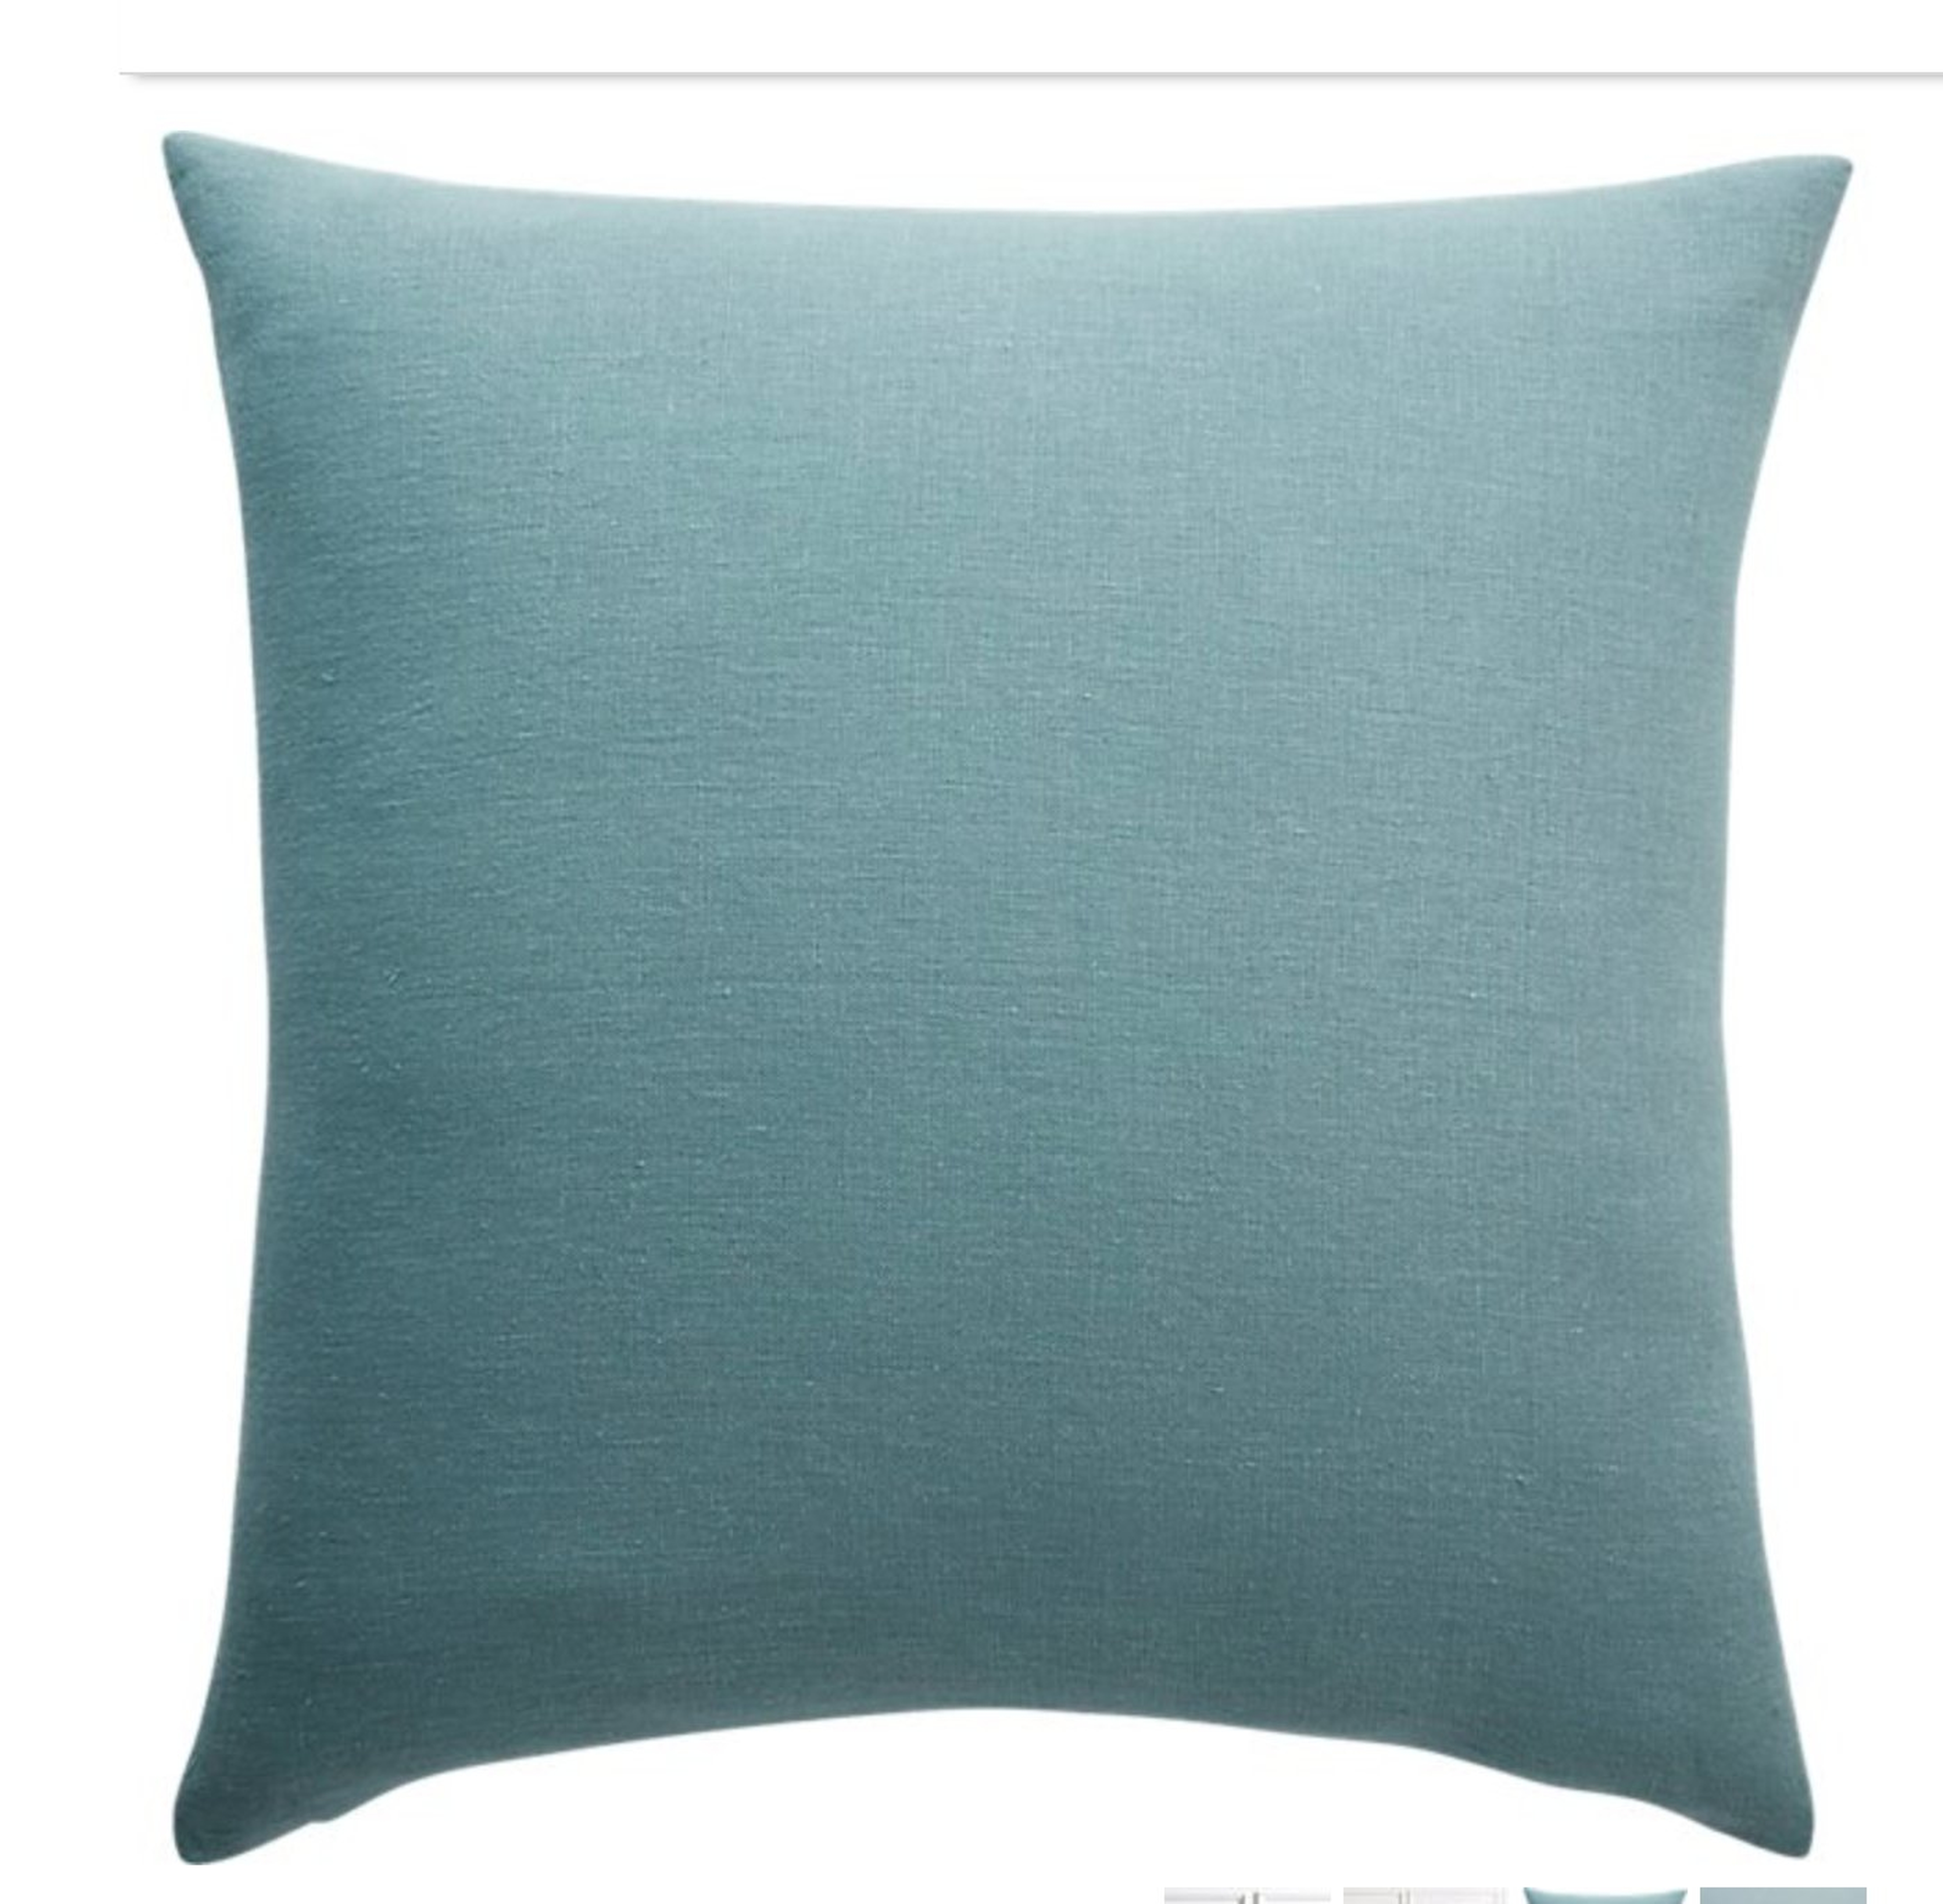 20" LINEN ARCTIC BLUE PILLOW WITH FEATHER-DOWN INSERT - CB2